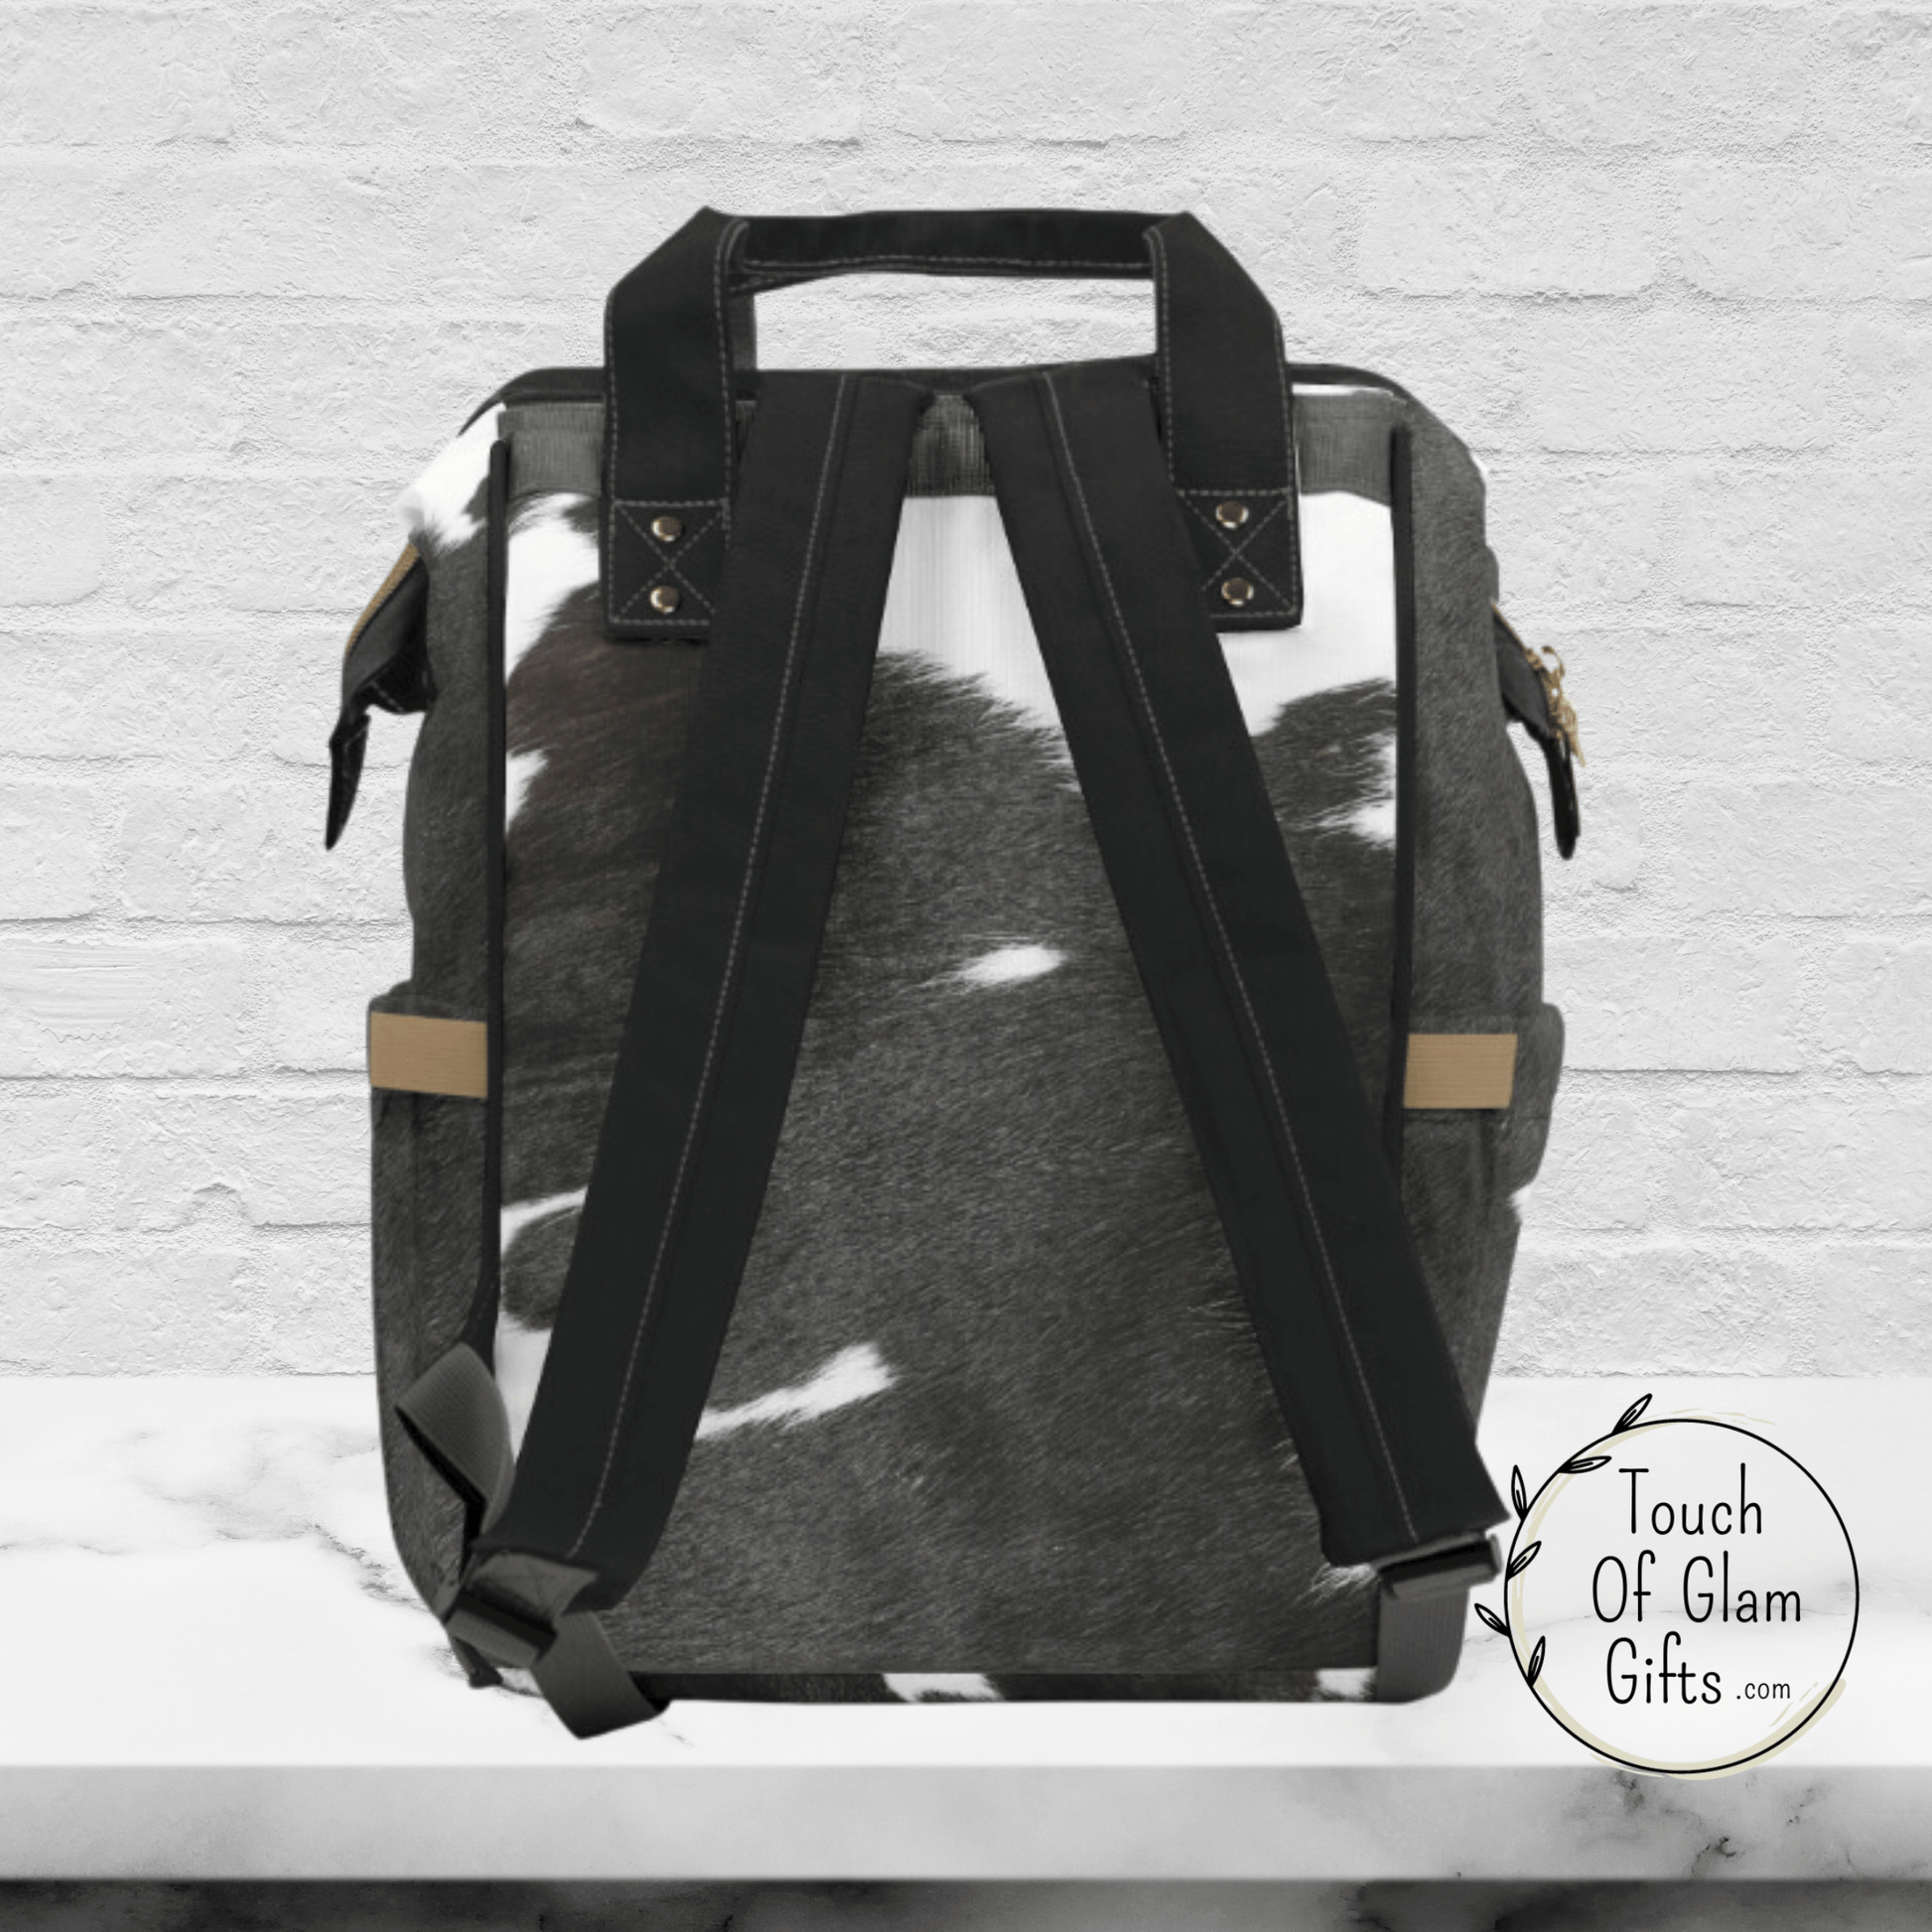 THe back side of our diaper bag backpack shows the black padded shoulder straps and black carrying handles.